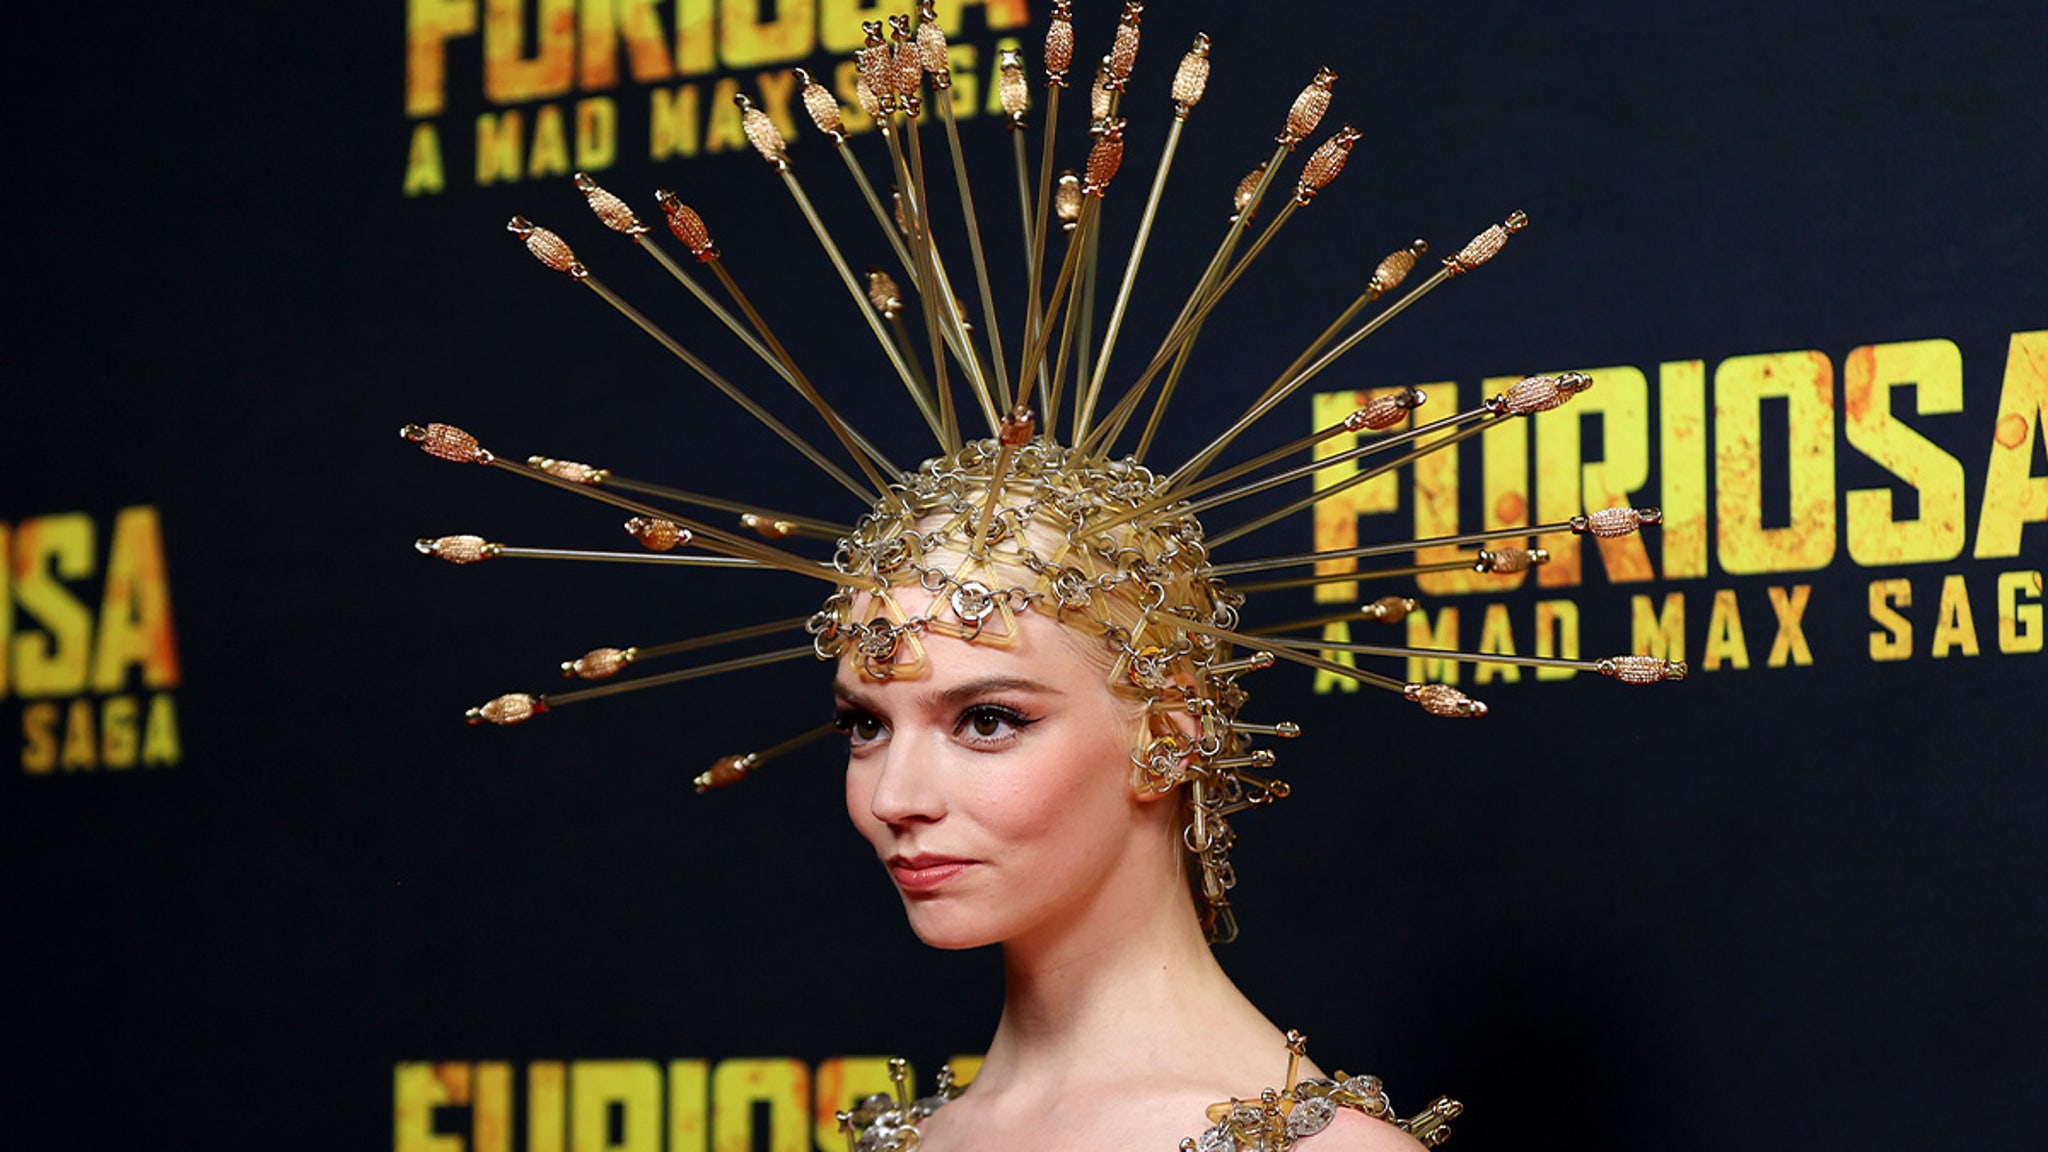 Anya Taylor-Joy Wears Sheer Dress Covered in Spikes to ‘Furiosa’ Premiere